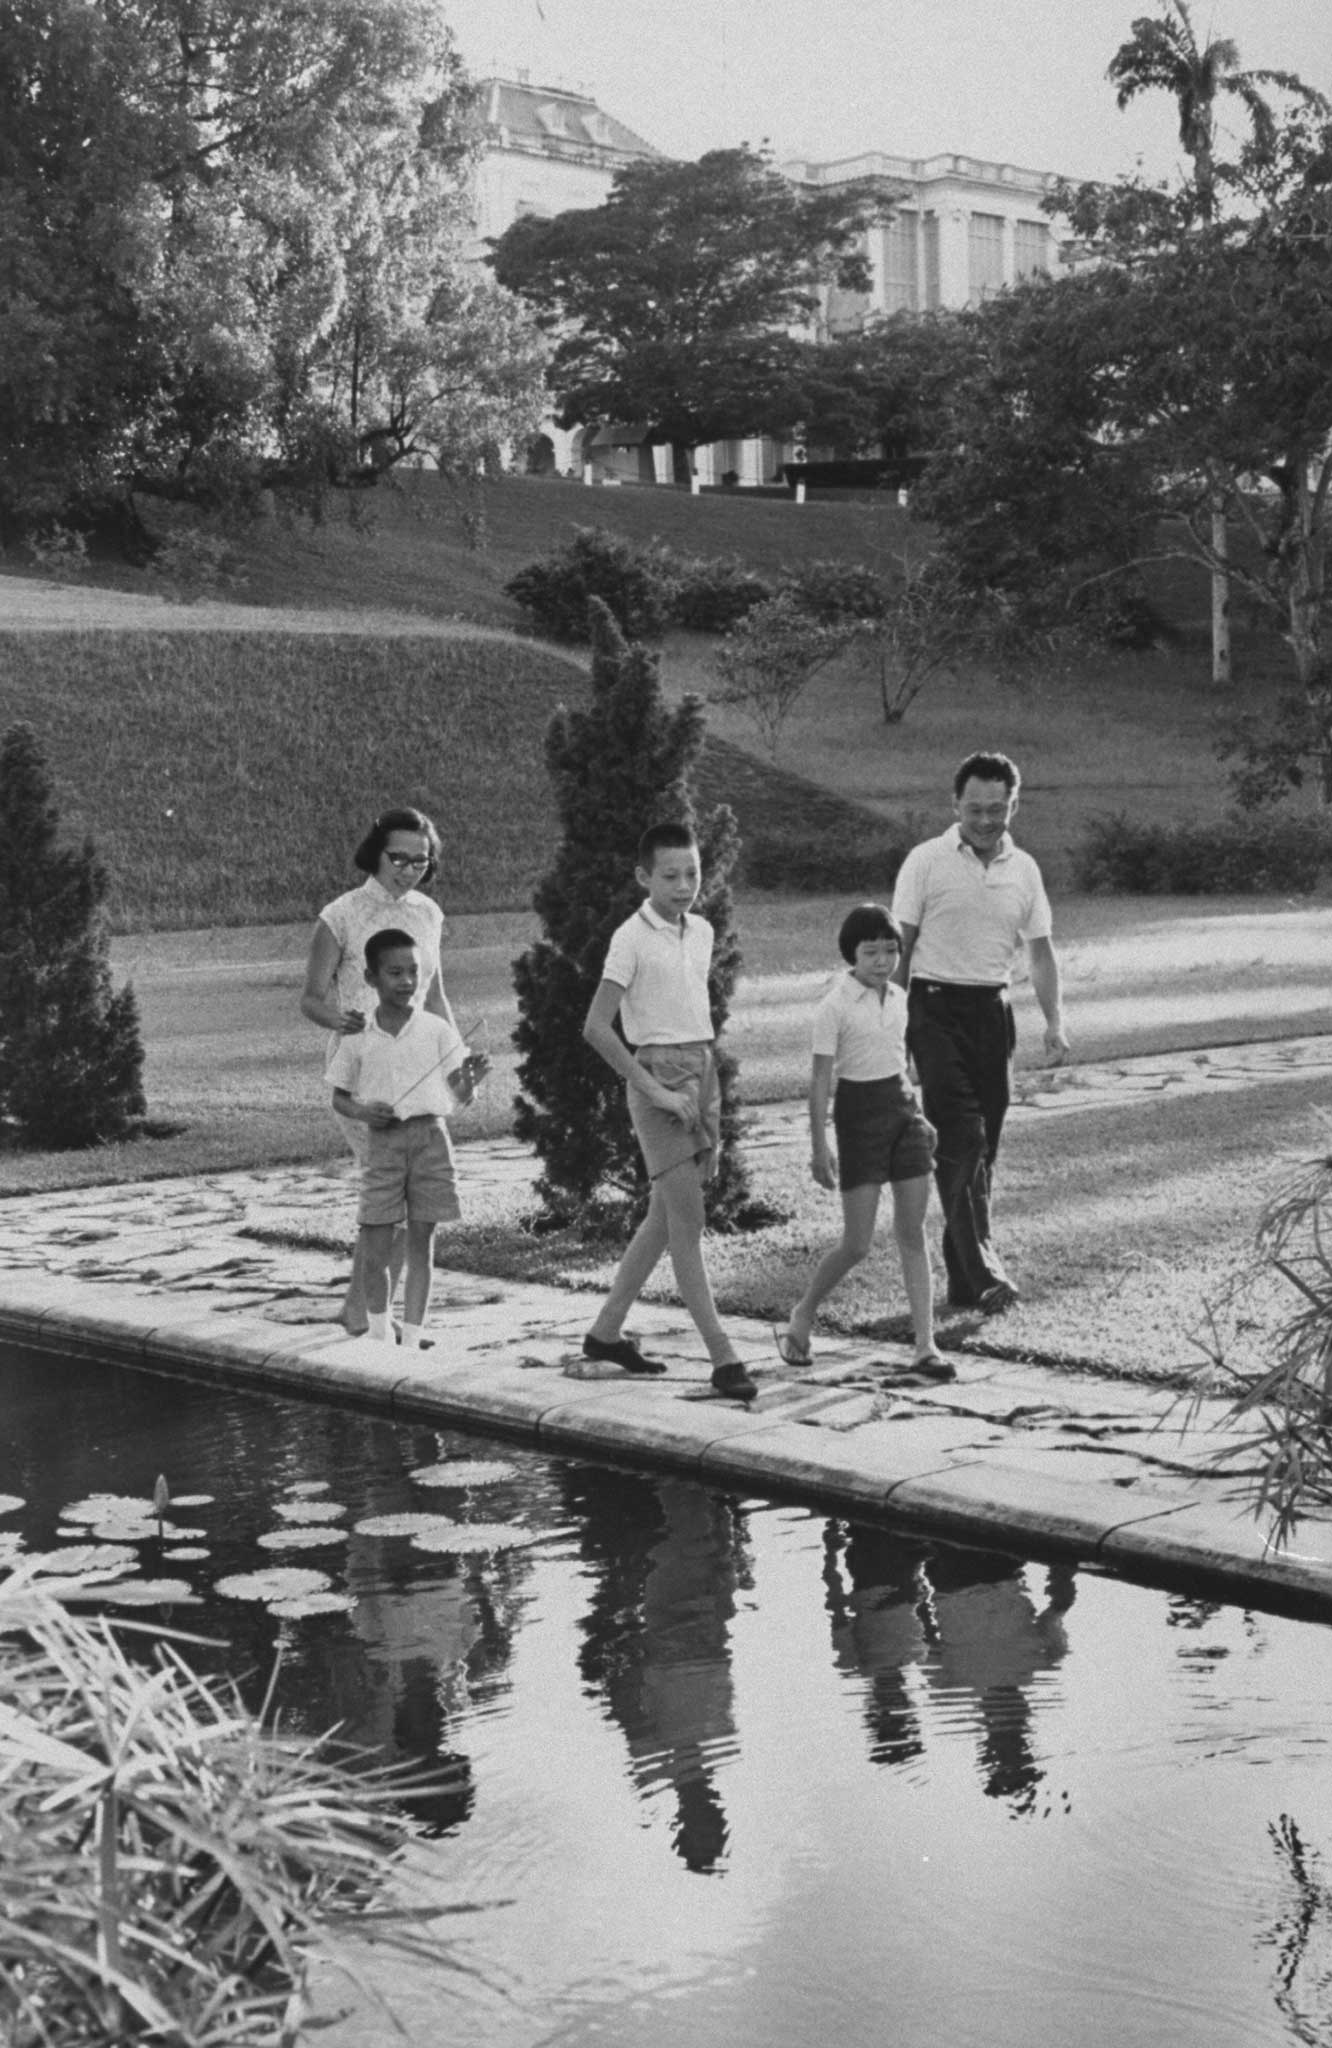 Prime Minister Kuan Yew Lee and family at official residence of "Sri Tamasek" in 1965.